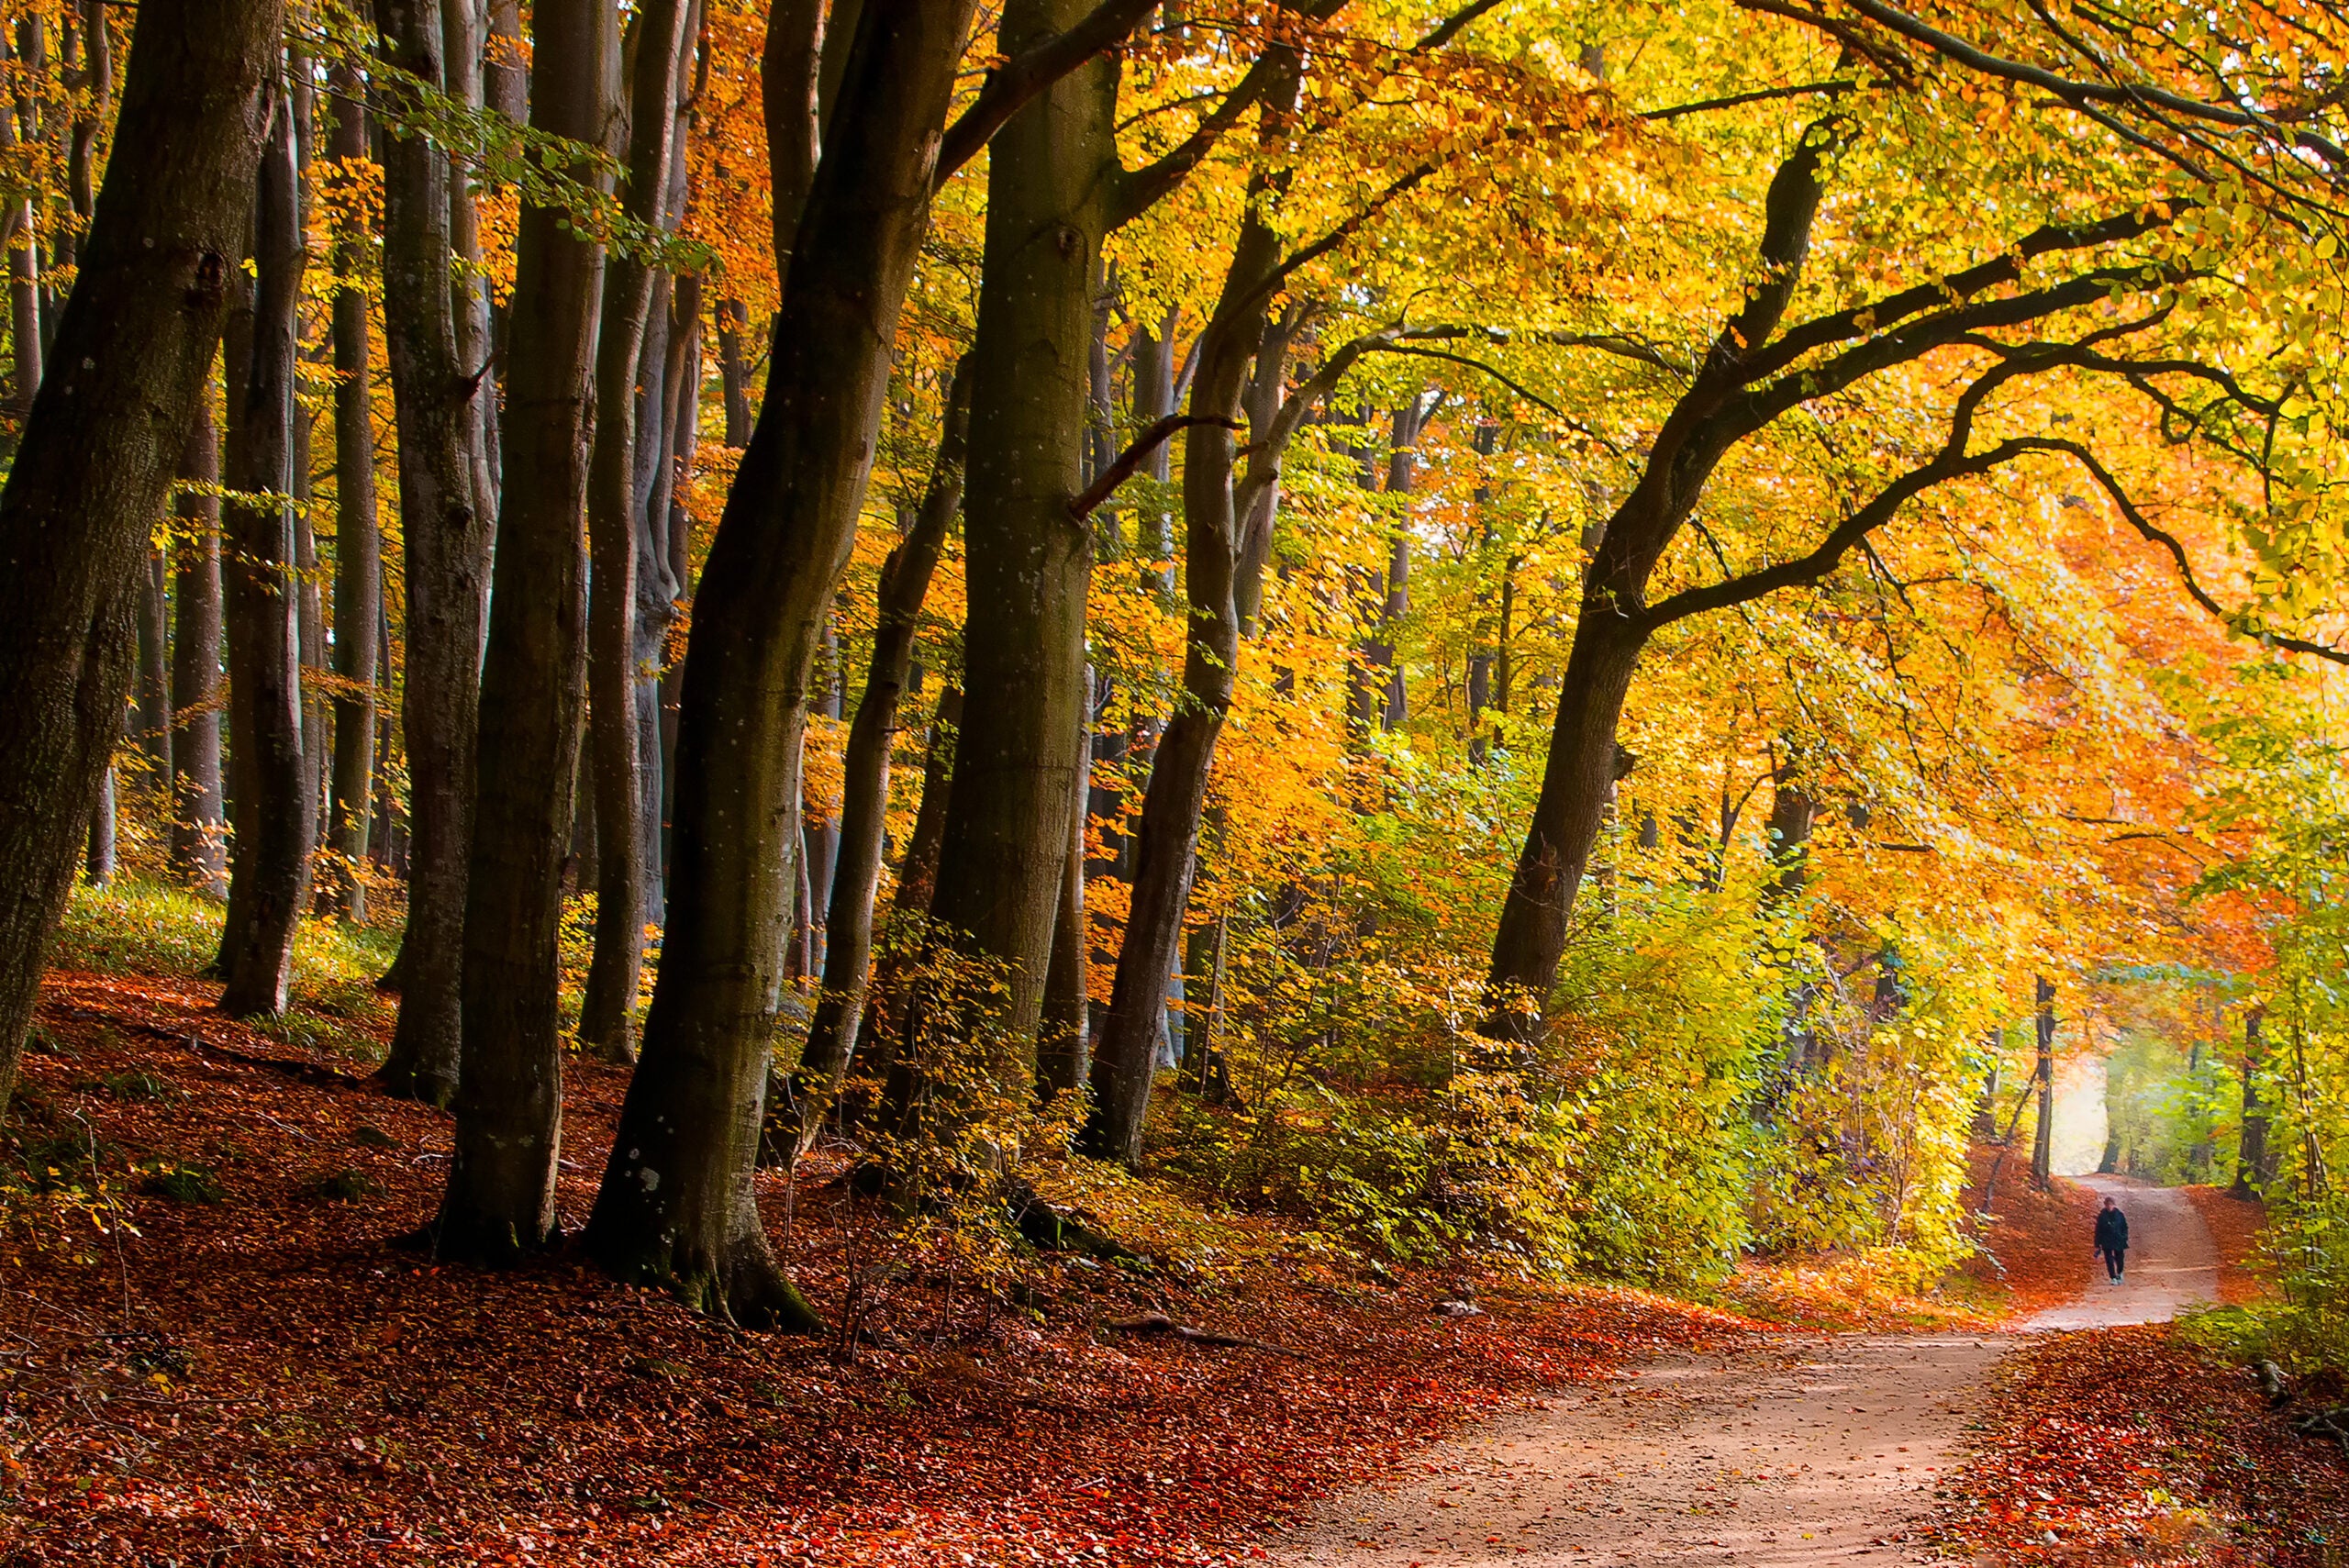 The leaves of a beech tree forest, south of the city of Aarhus, Jutland, Denmark change color after summer.